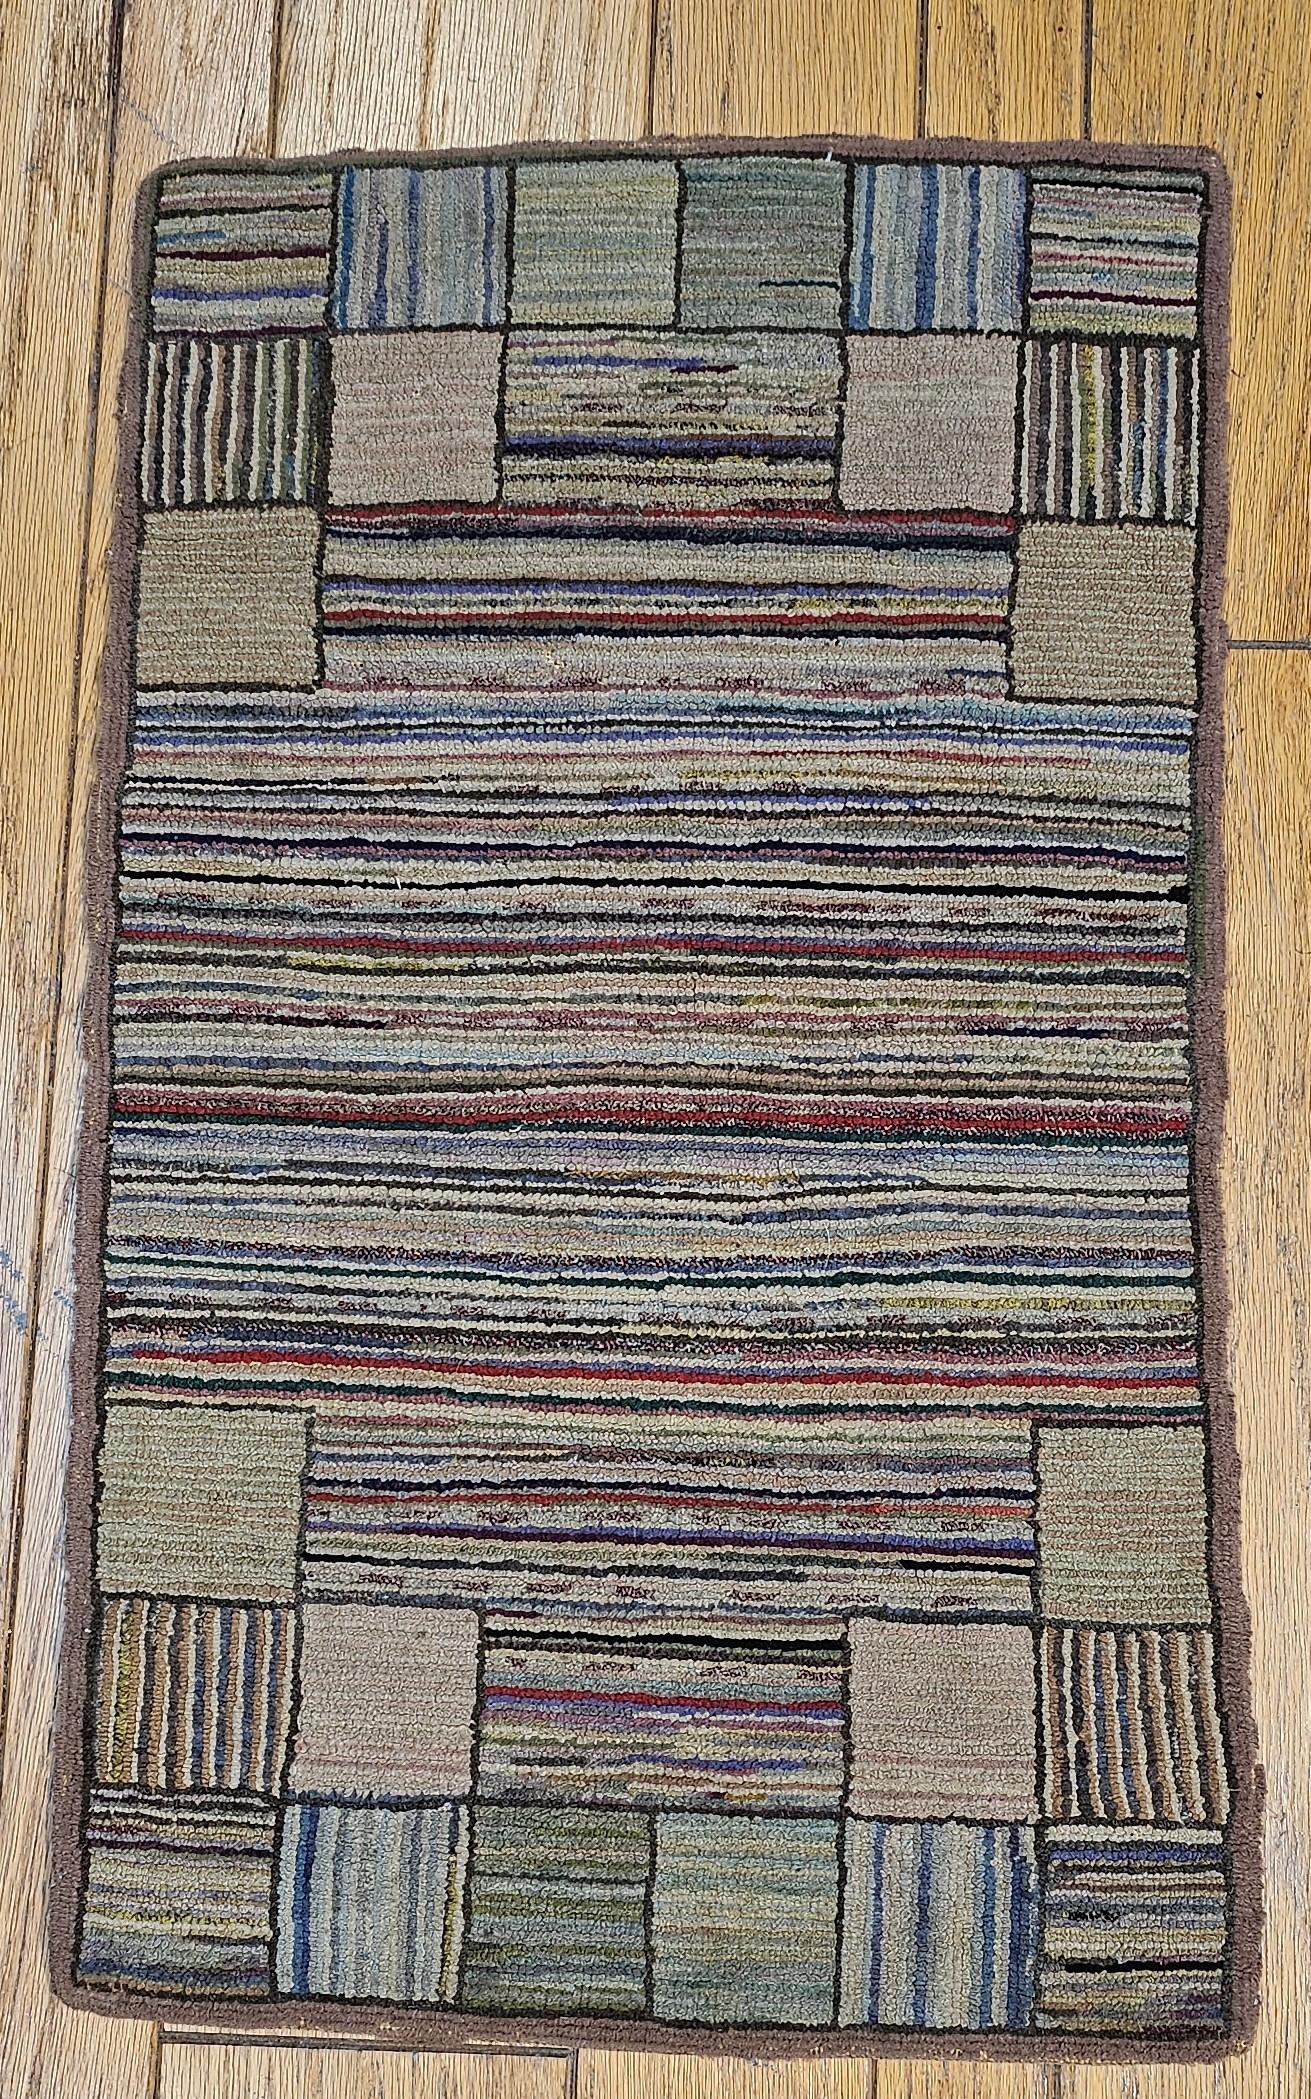 Vintage American hand hooked rug in a stripe pattern handcrafted in the 1st quarter of the 1900s.  The  hooked rugs from the late 19th and early 20th centuries are made with recycled old material, often used clothing that had been cut into narrow